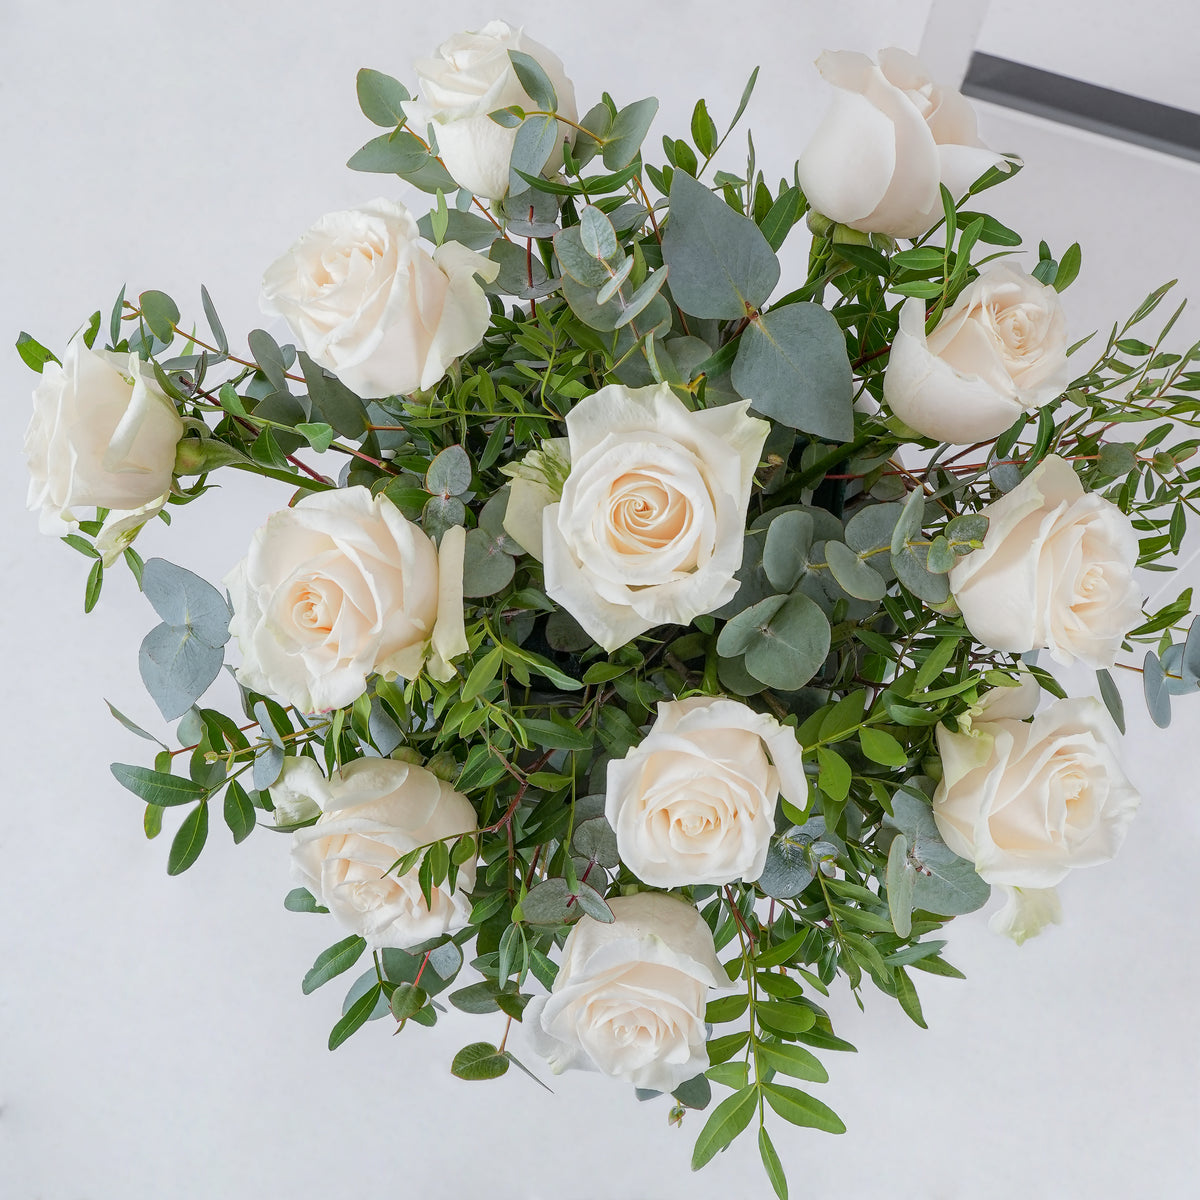 White Roses with greens